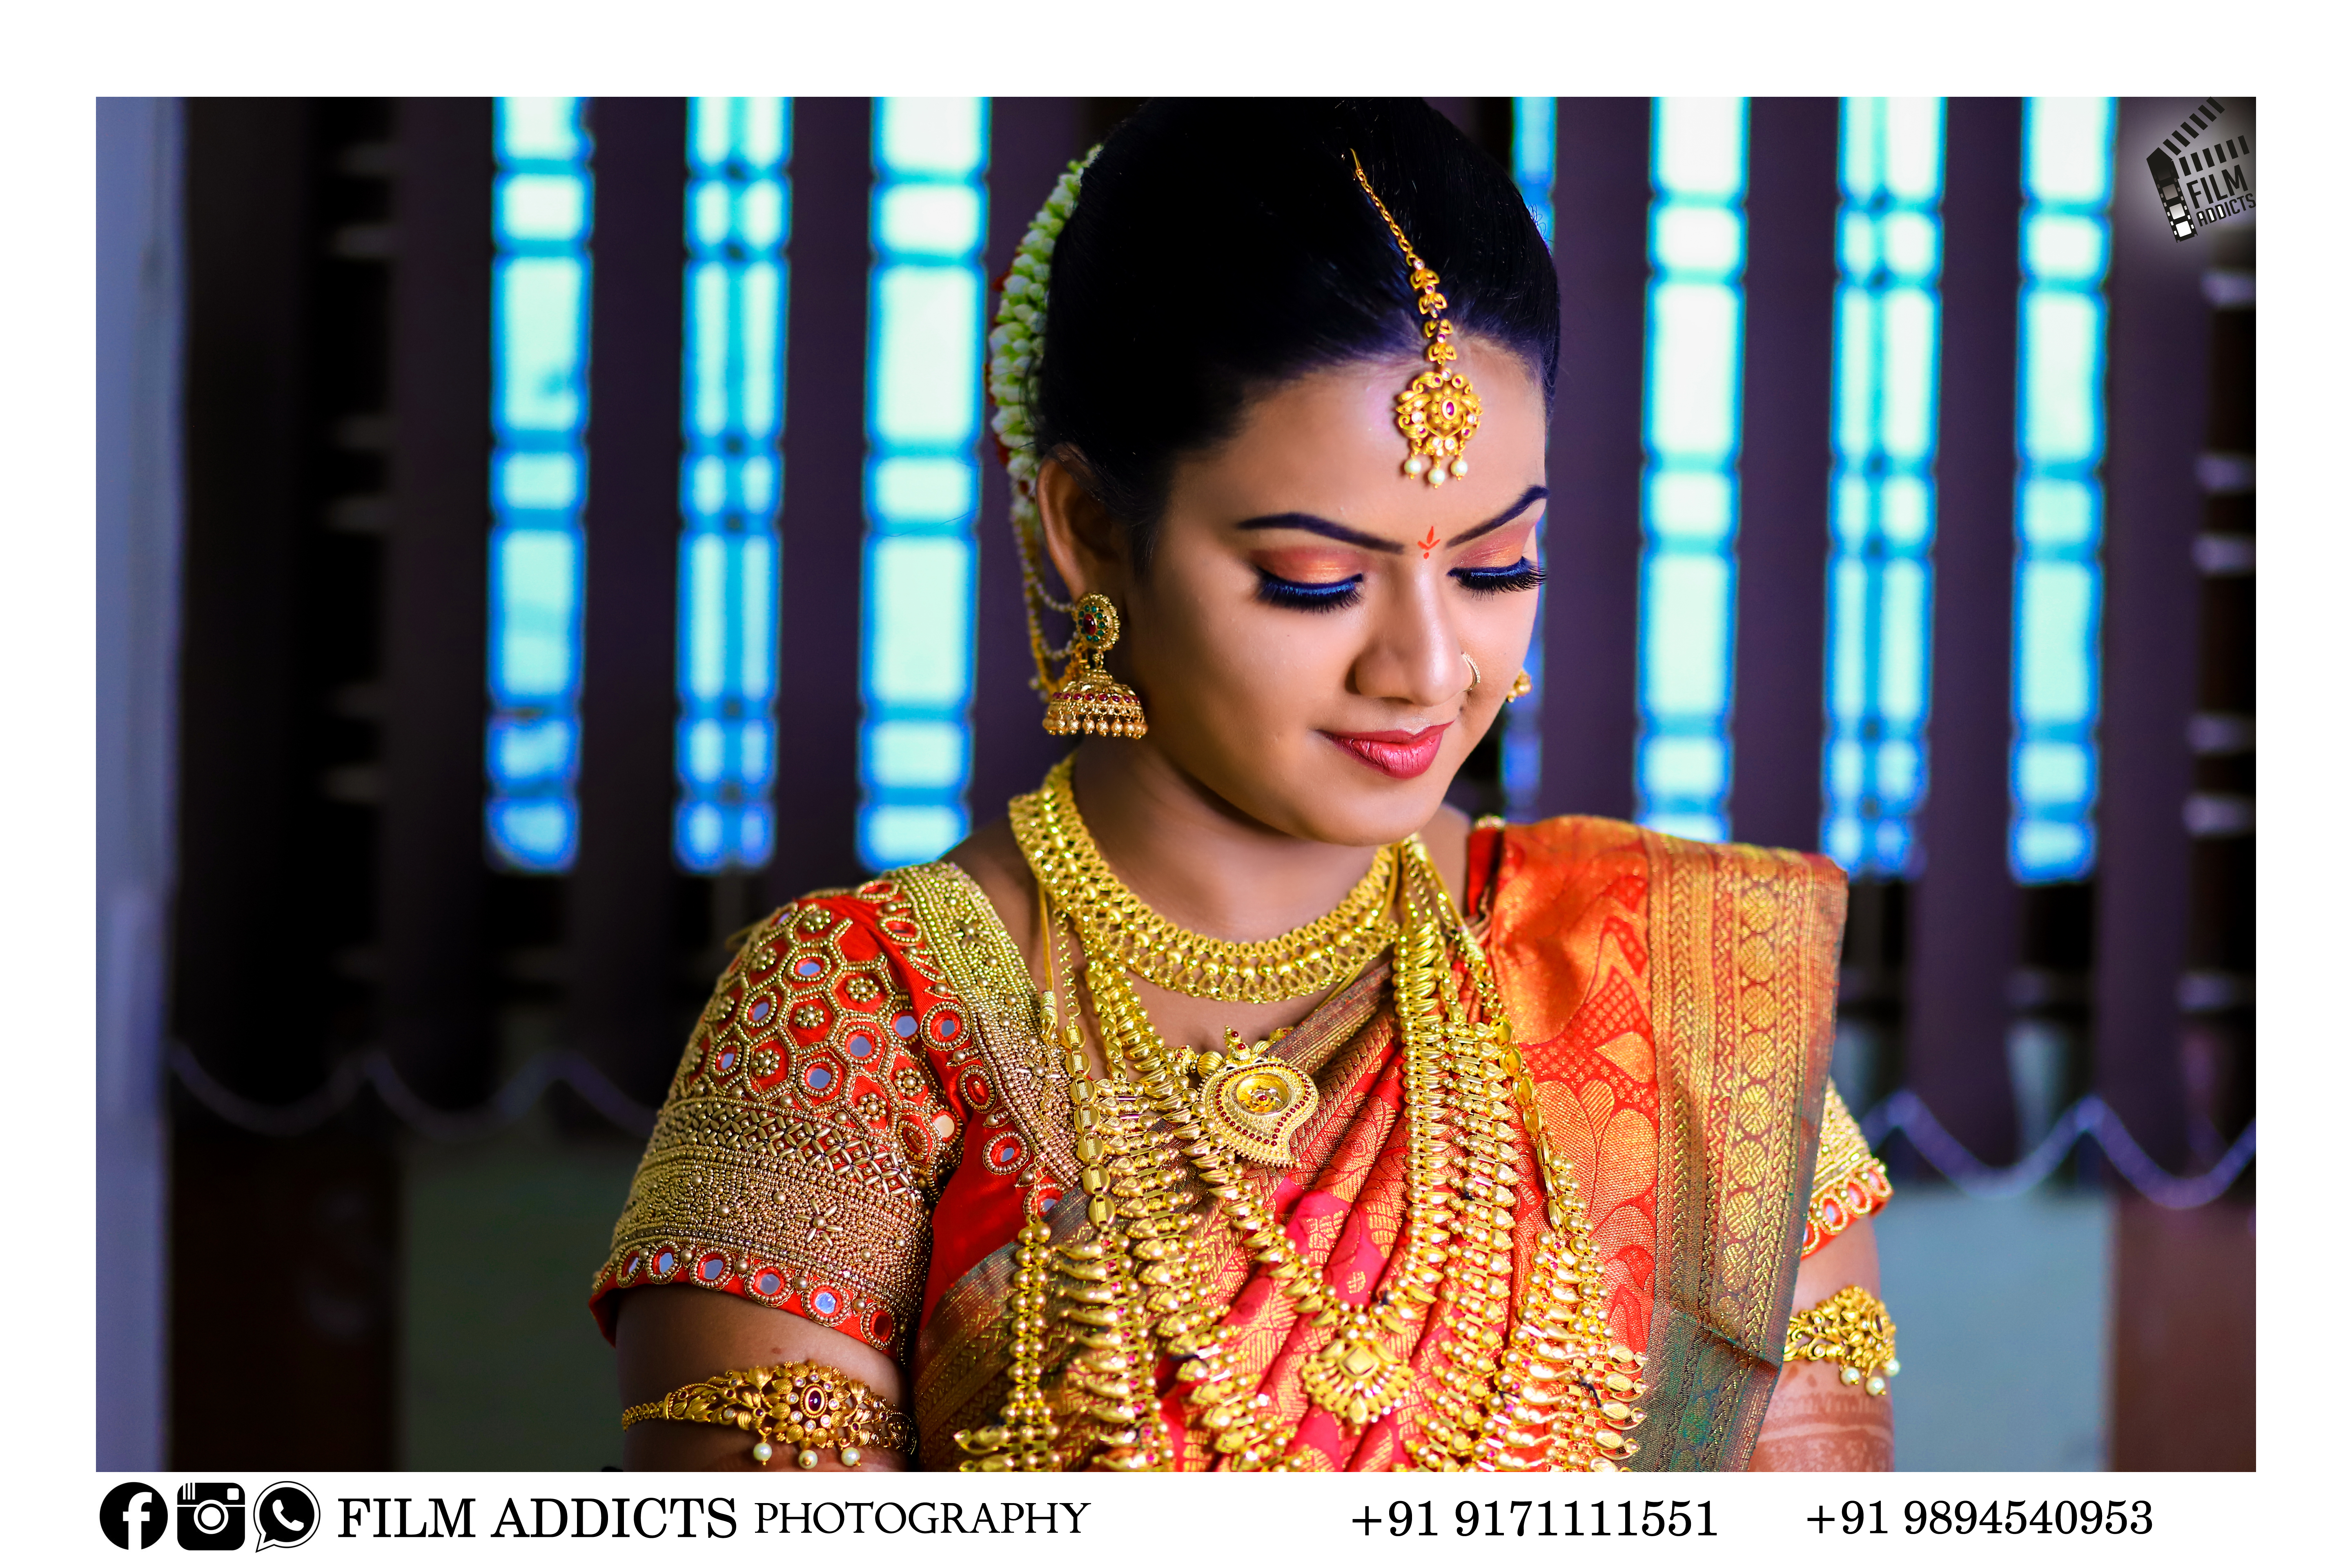 best bridal makeup Services in theni,
                                        best marriage bridal makeup services in theni,
                                        famous bridal makeup services in theni,
                                        best events bridal makeup services in theni,
                                        Eventing bridal makeup services in theni,
                                        excellent bridal makeup services in theni,
                                        professional bridal makeup services in theni,
                                        theni's best bridal makeup services,
                                        theni's best bridal makeup services in theni,
                                        filmaddicts bridal makeup services in theni,
                                        filmaddicts best bridal makeup in theni,
                                        filmaddicts best bridal makeup services in theni,
                                        bridal makeup services in theni
                                        